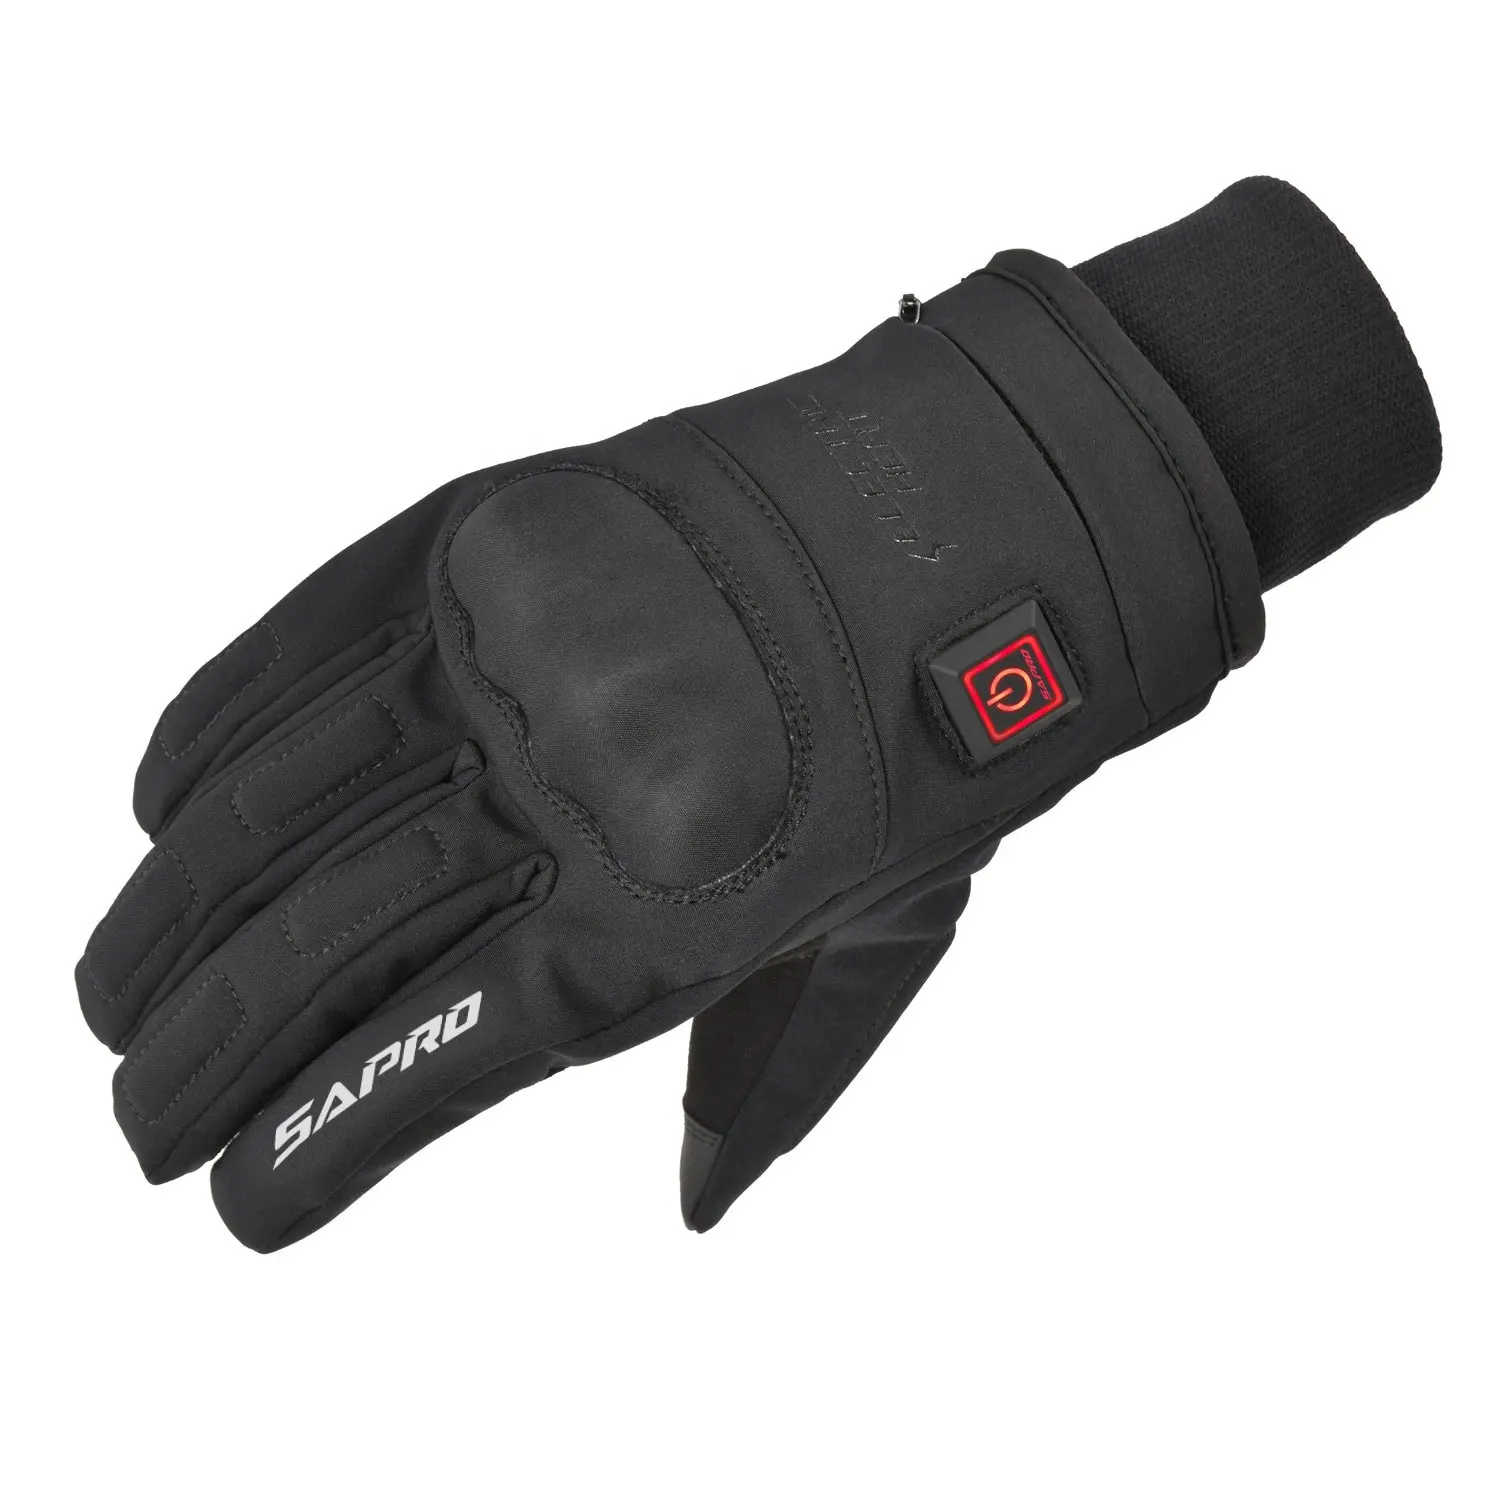 HAWKISH DC12V ELECTRIC SHORT WINTER GLOVES / Short Winter Gloves with Electric Heater / Rib Knit Cuff Makes it Easy to Put On